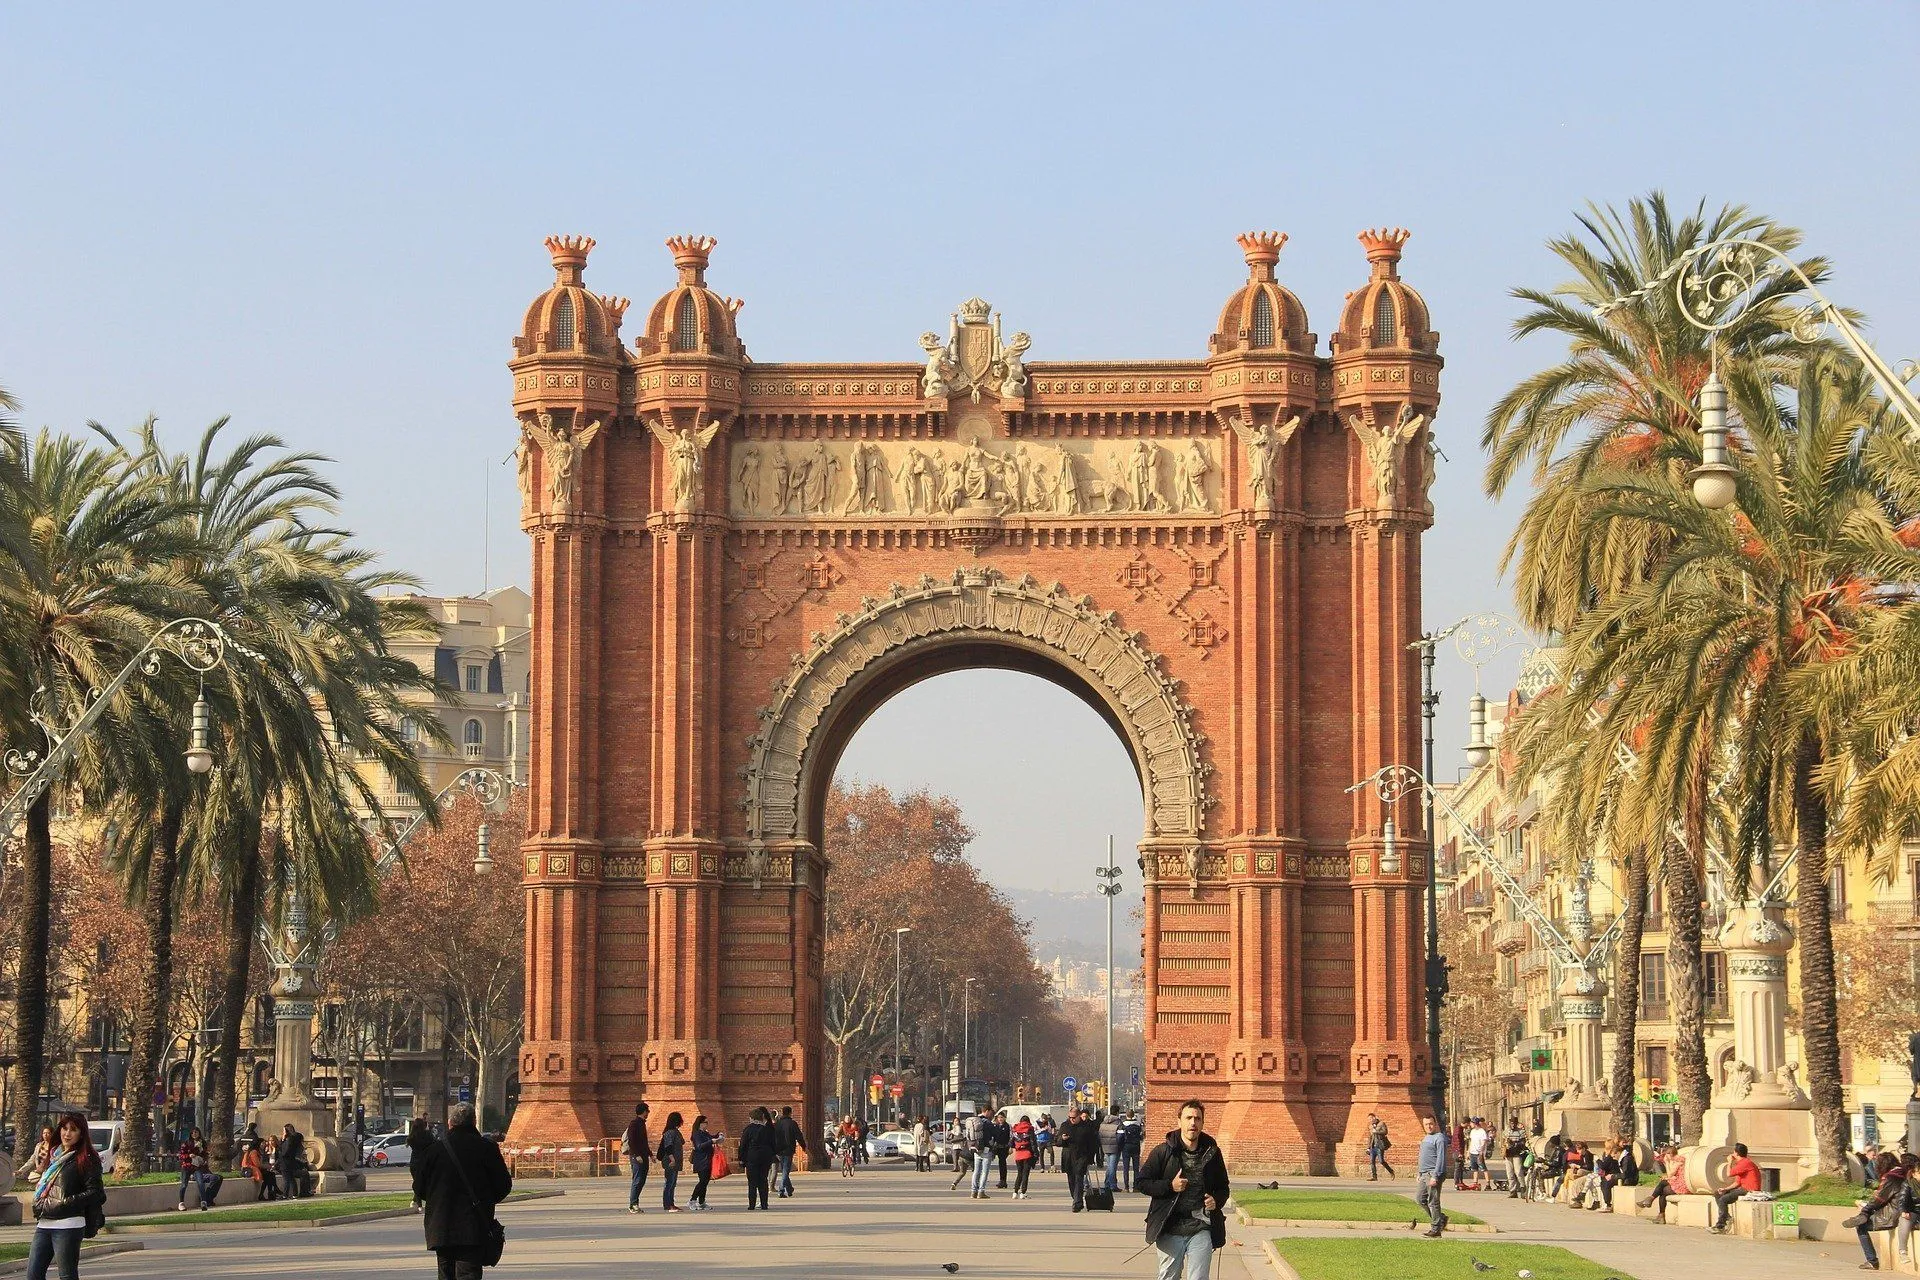 Barcelona facts help you understand more about Spanish culture.